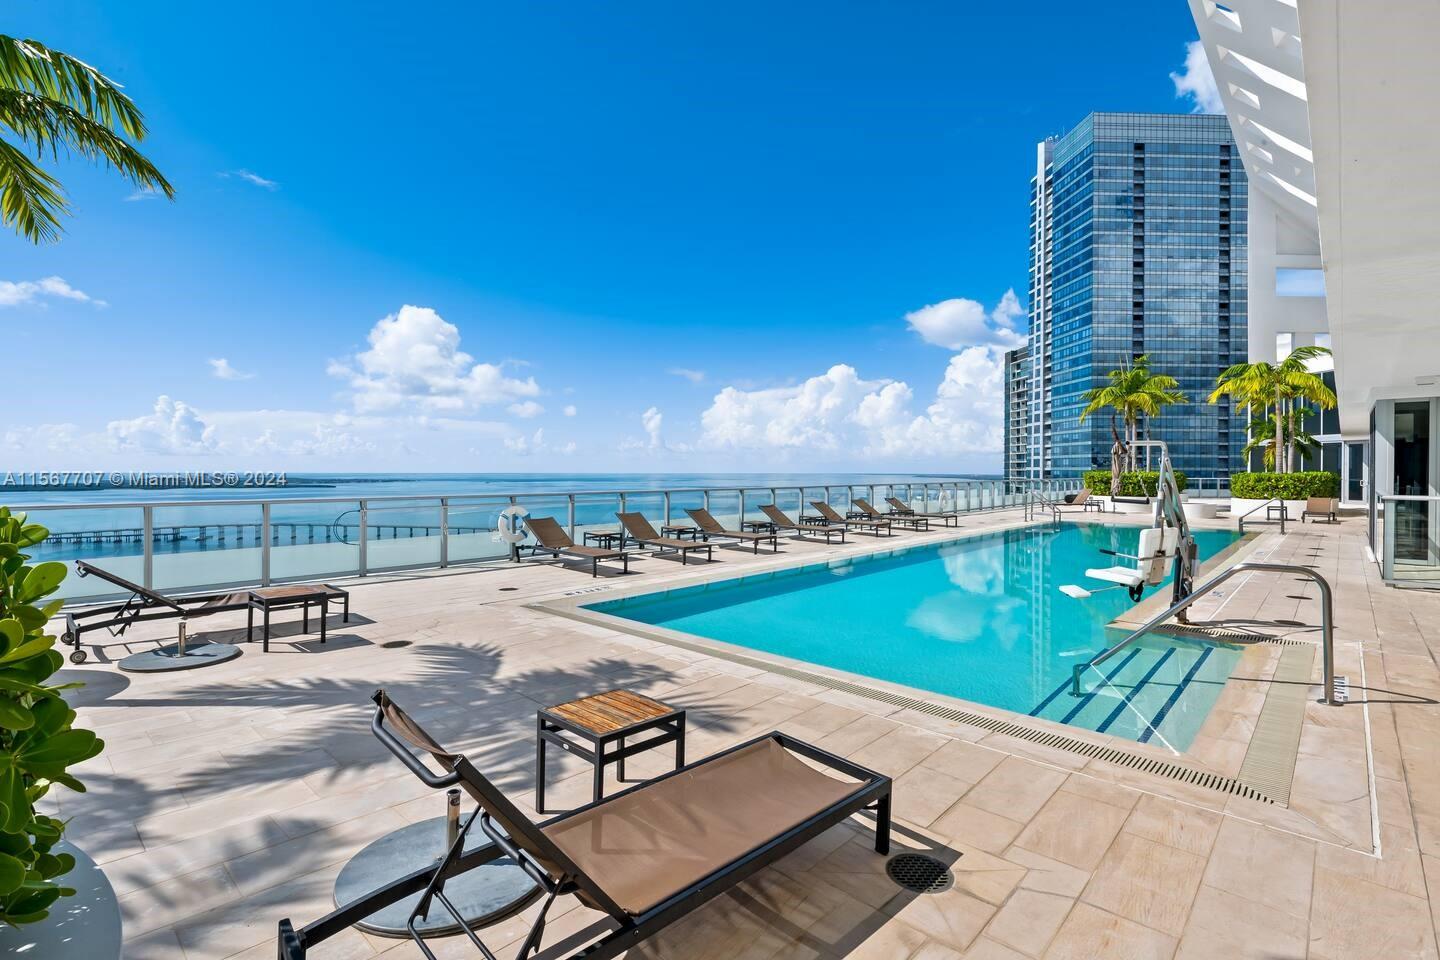 We're excited to present a remarkable opportunity at Brickell House: a fully furnished studio boasting panoramic views of Brickell Bay from its seventh-floor vantage point. This exquisite residence offers an array of luxury amenities, including access to two pools, a state-of-the-art gym, and a delightful BBQ area.

What sets this listing apart is its inclusion of an assigned parking space and valet service, ensuring convenience and ease for residents. It's important to note that rental insurance is required by the owner.